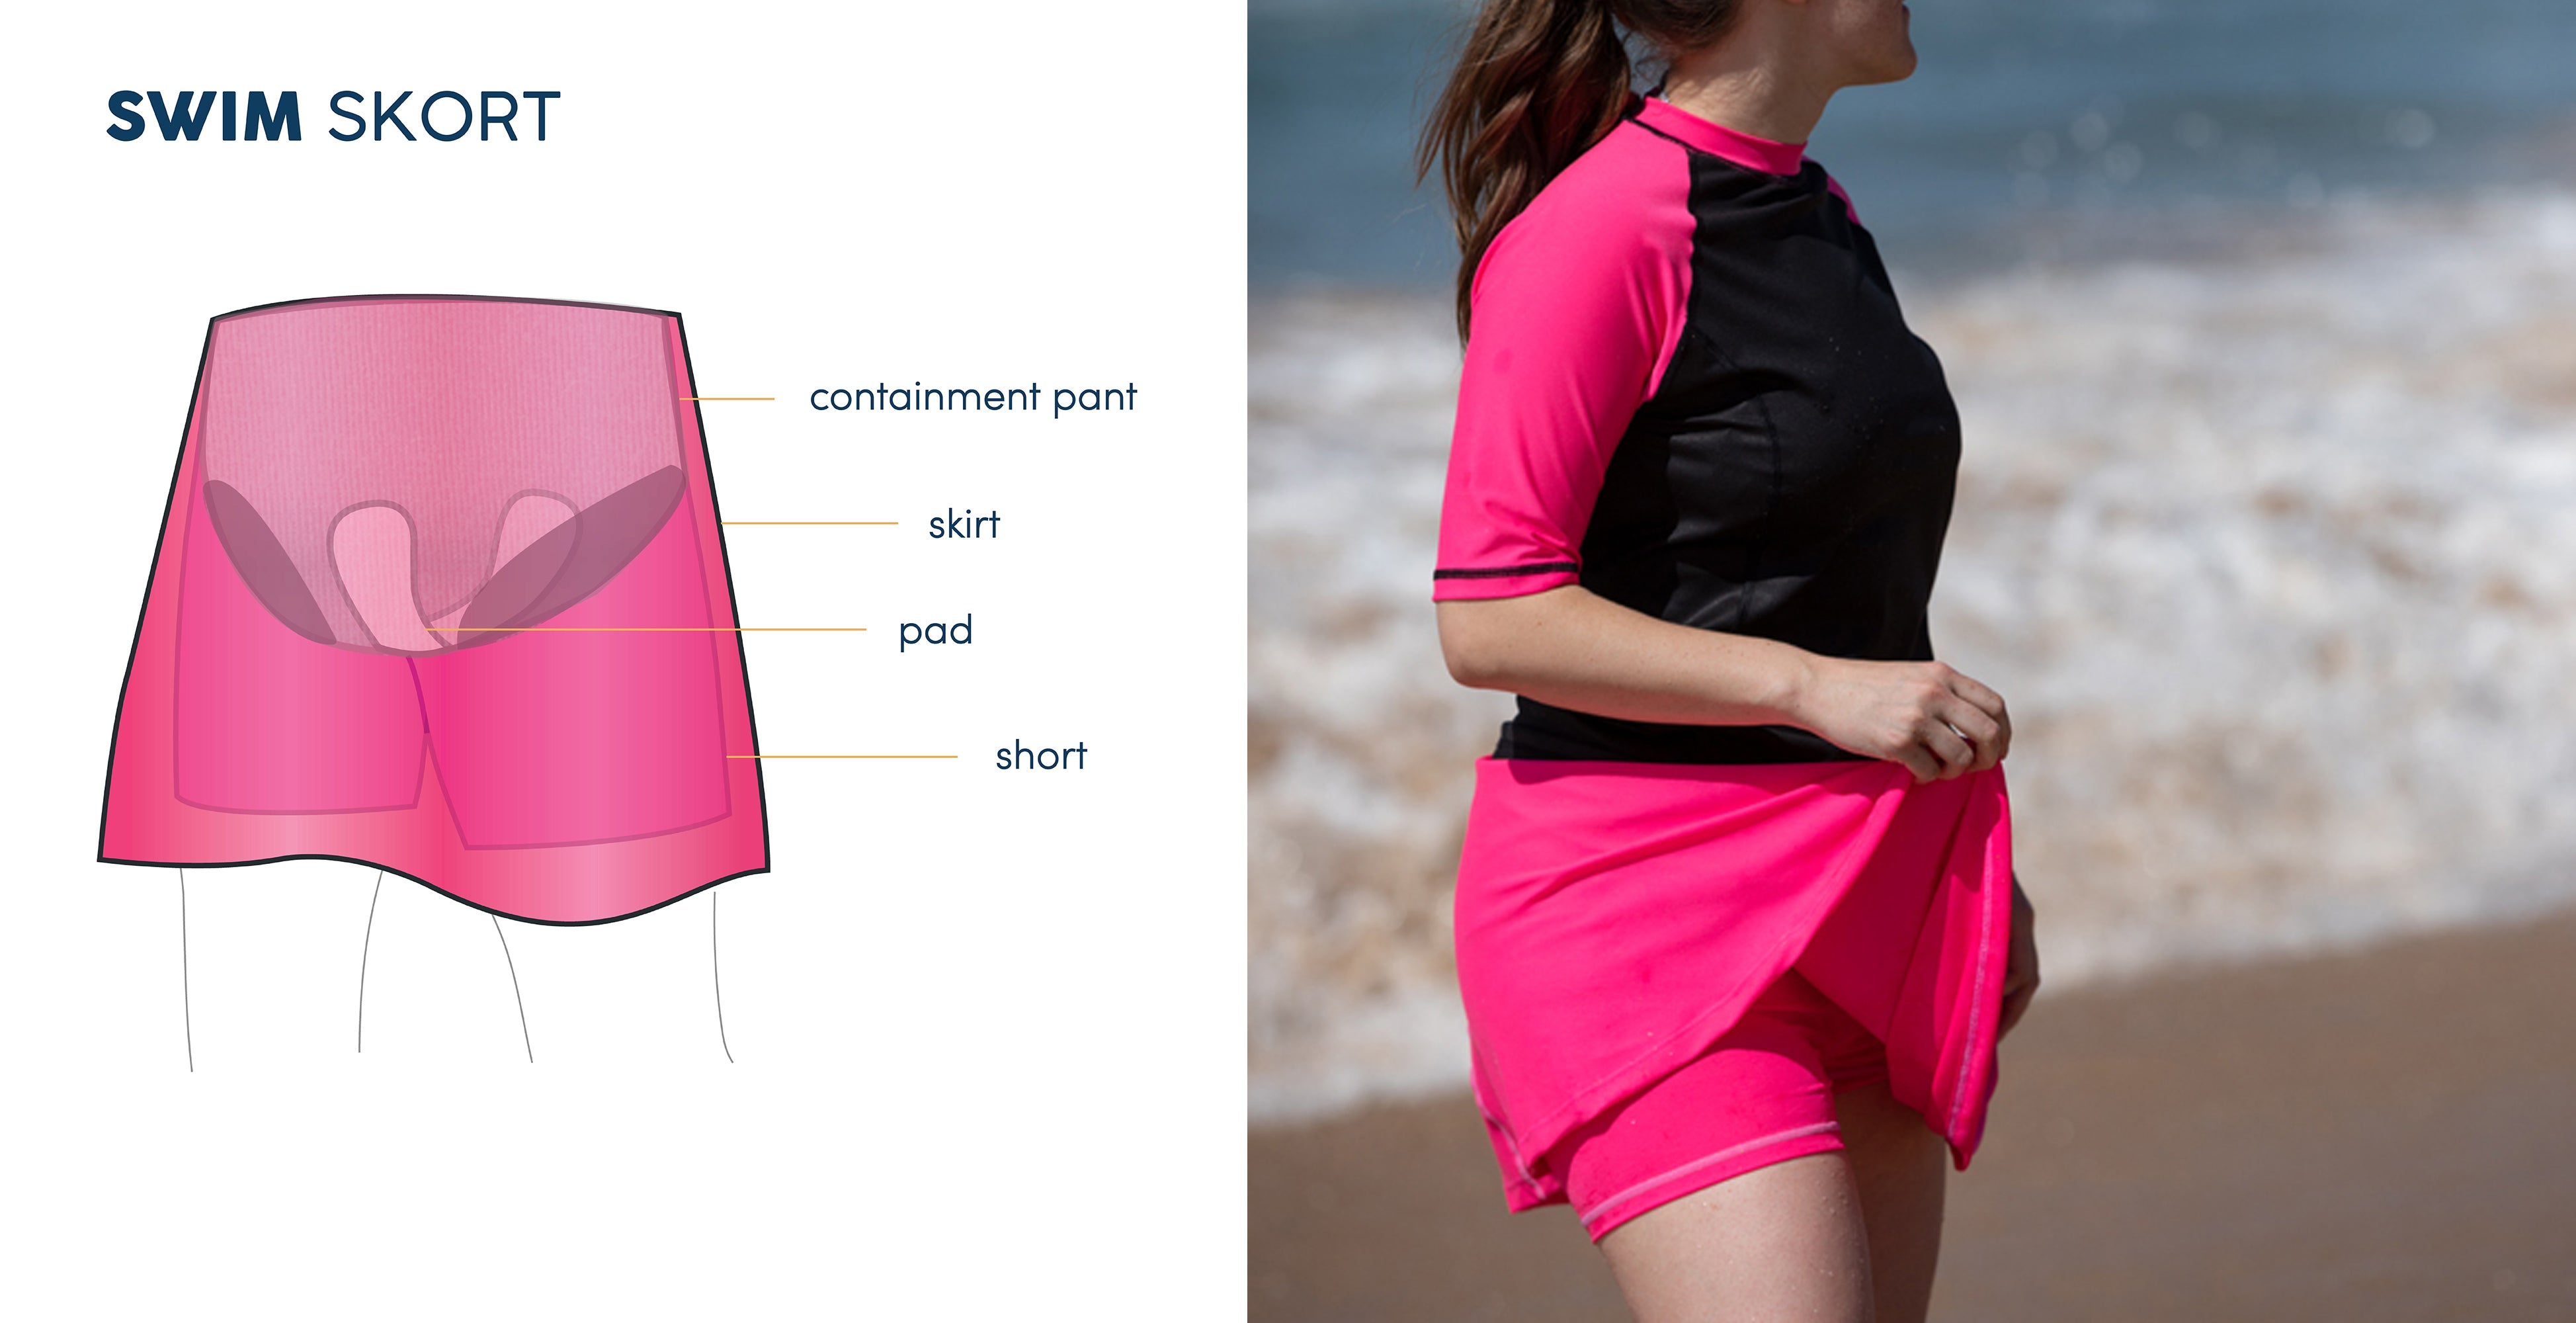 Does Incontinence Swimwear Really Work?